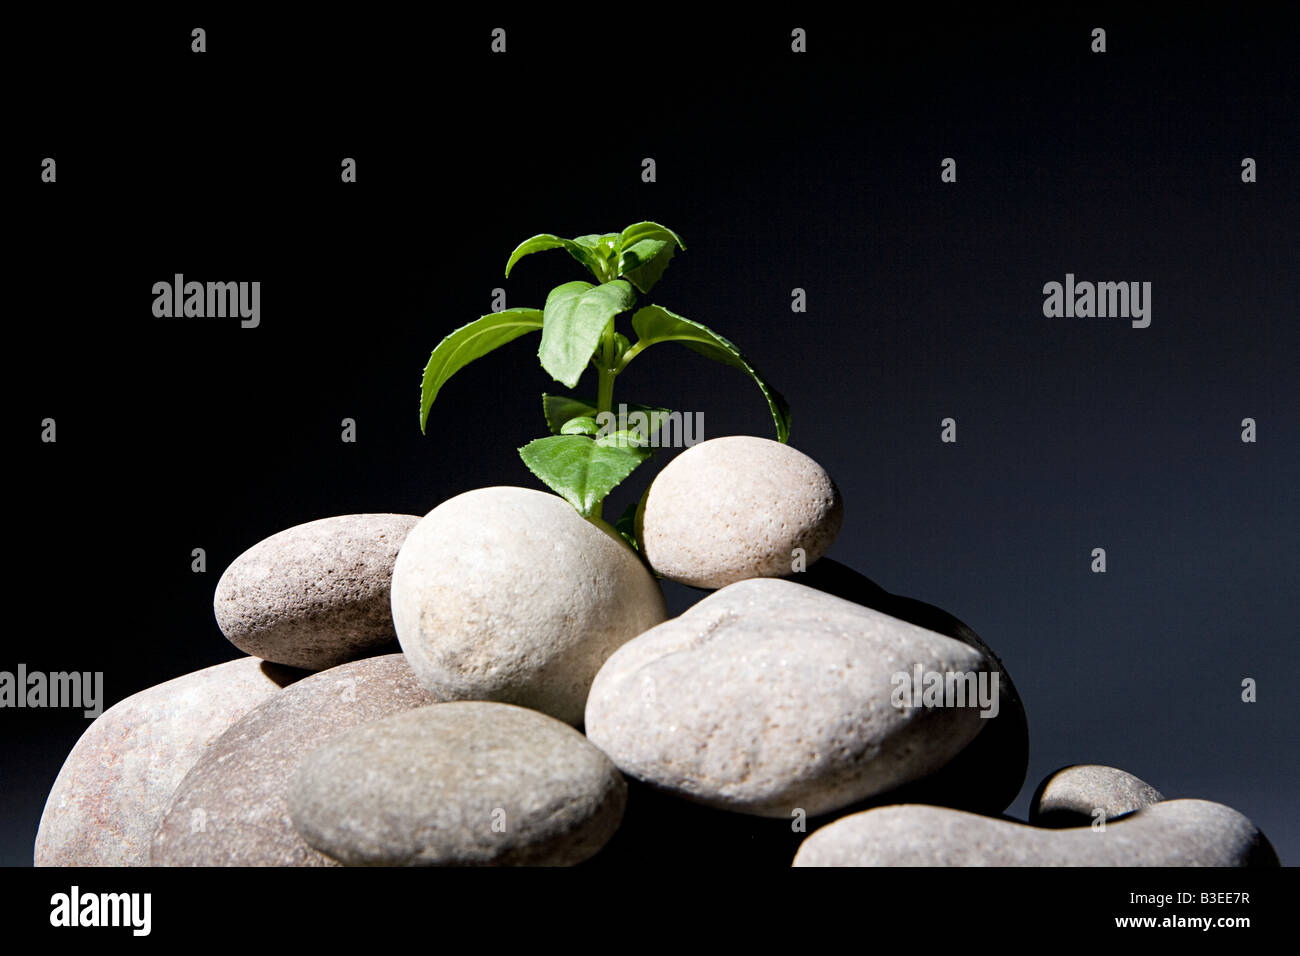 Plant growing from pebbles Stock Photo